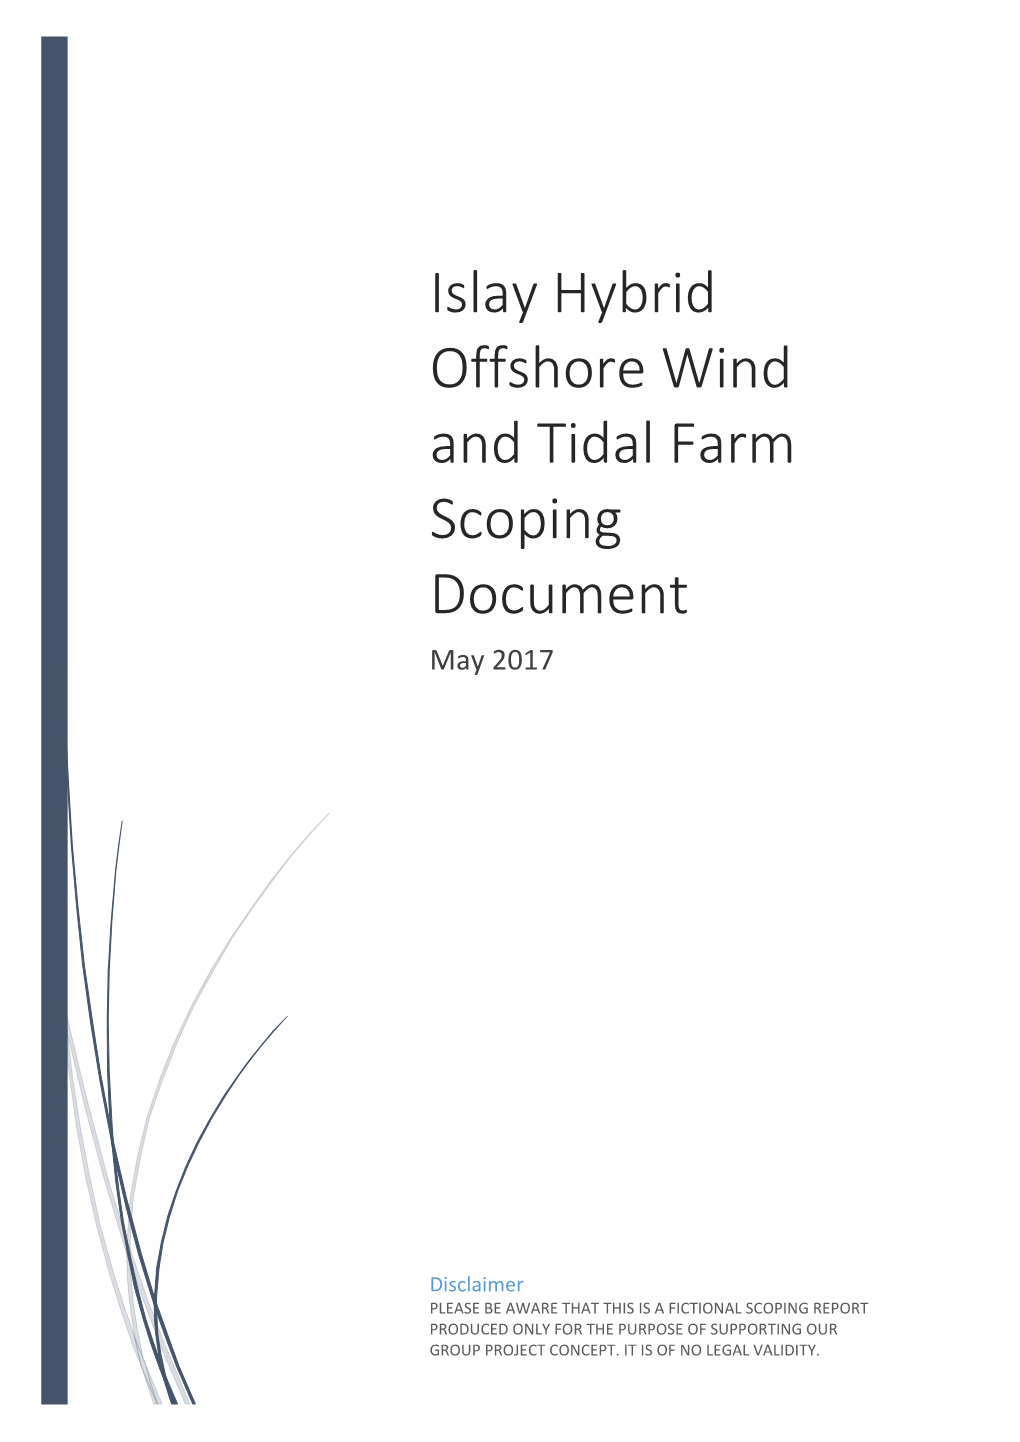 Islay Hybrid Offshore Wind and Tidal Farm Scoping Document May 2017